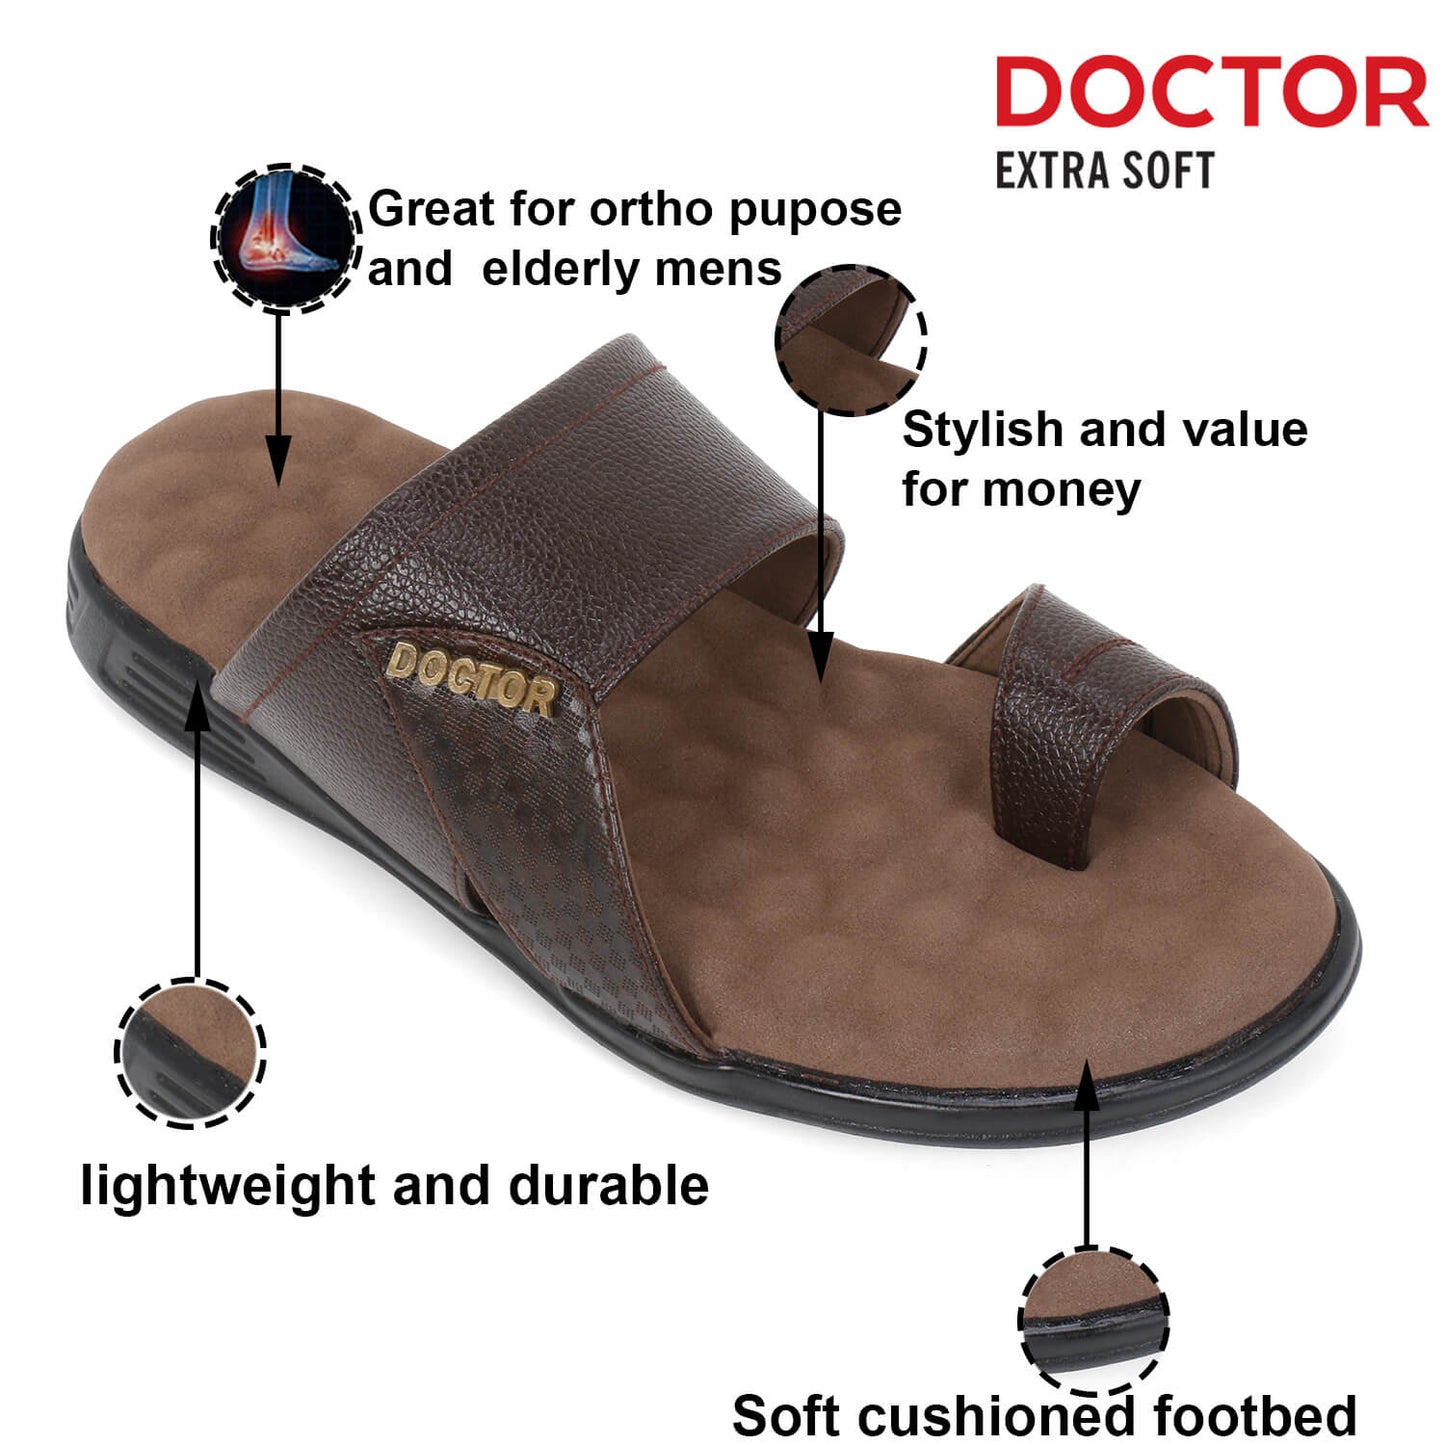 Doctor Extra Soft L-4, Anti Skid With Cushioned Footbed Skin Friendly Chappal/Sandals for Men-Gents-Boys